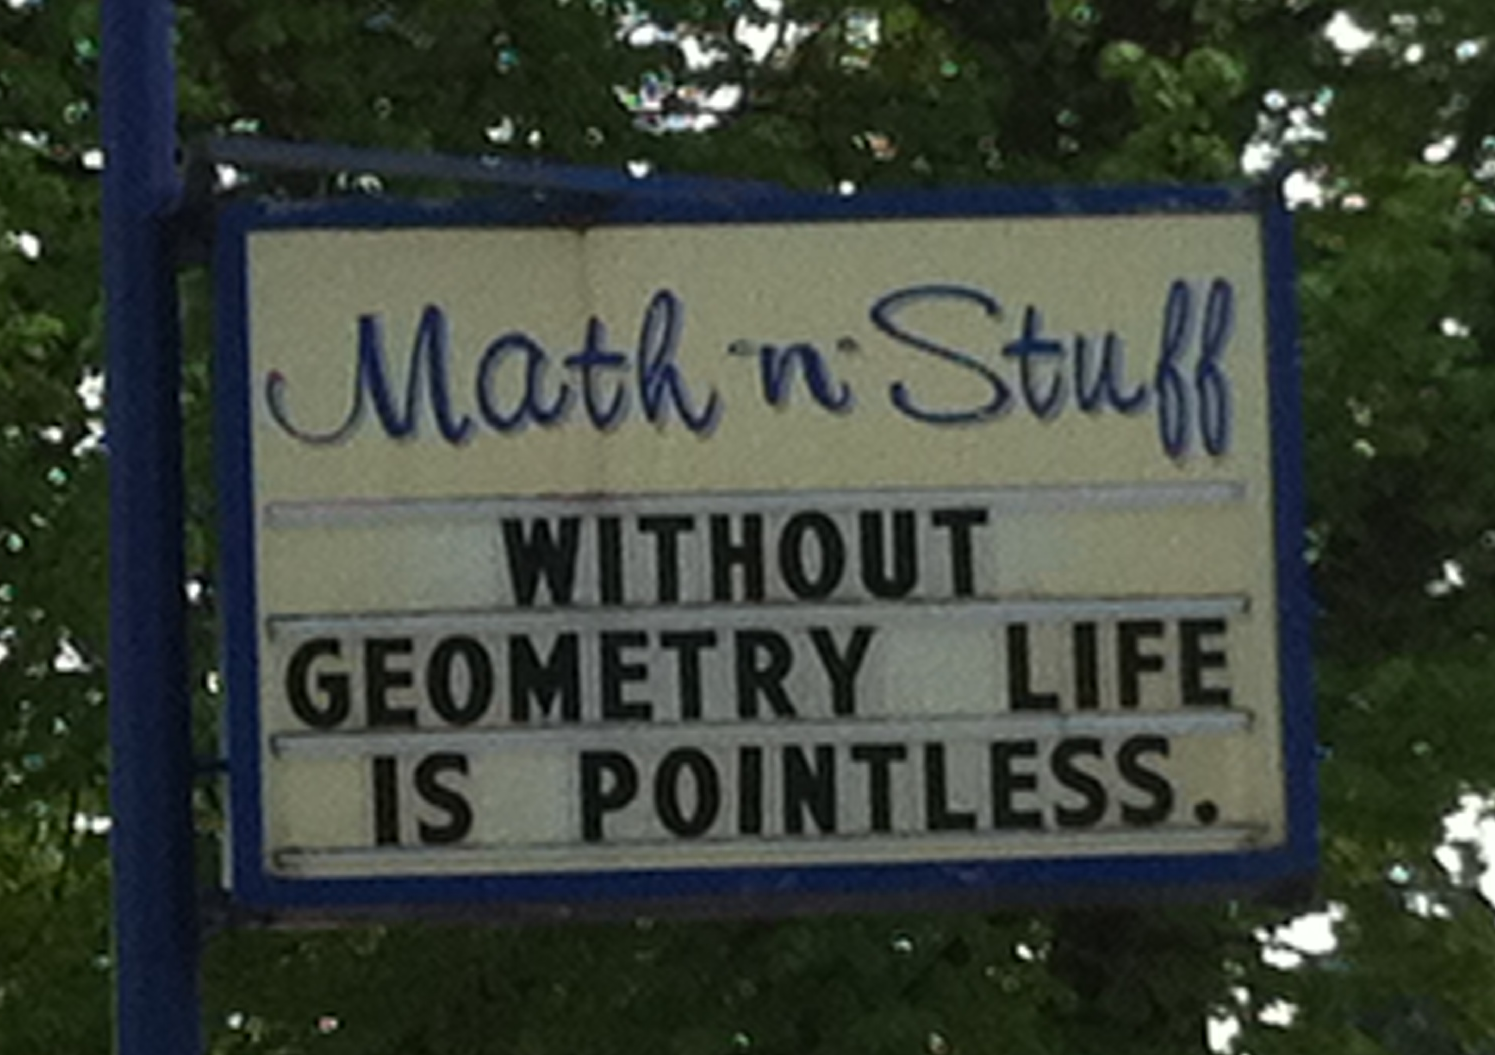 Without Geometry life is pointless